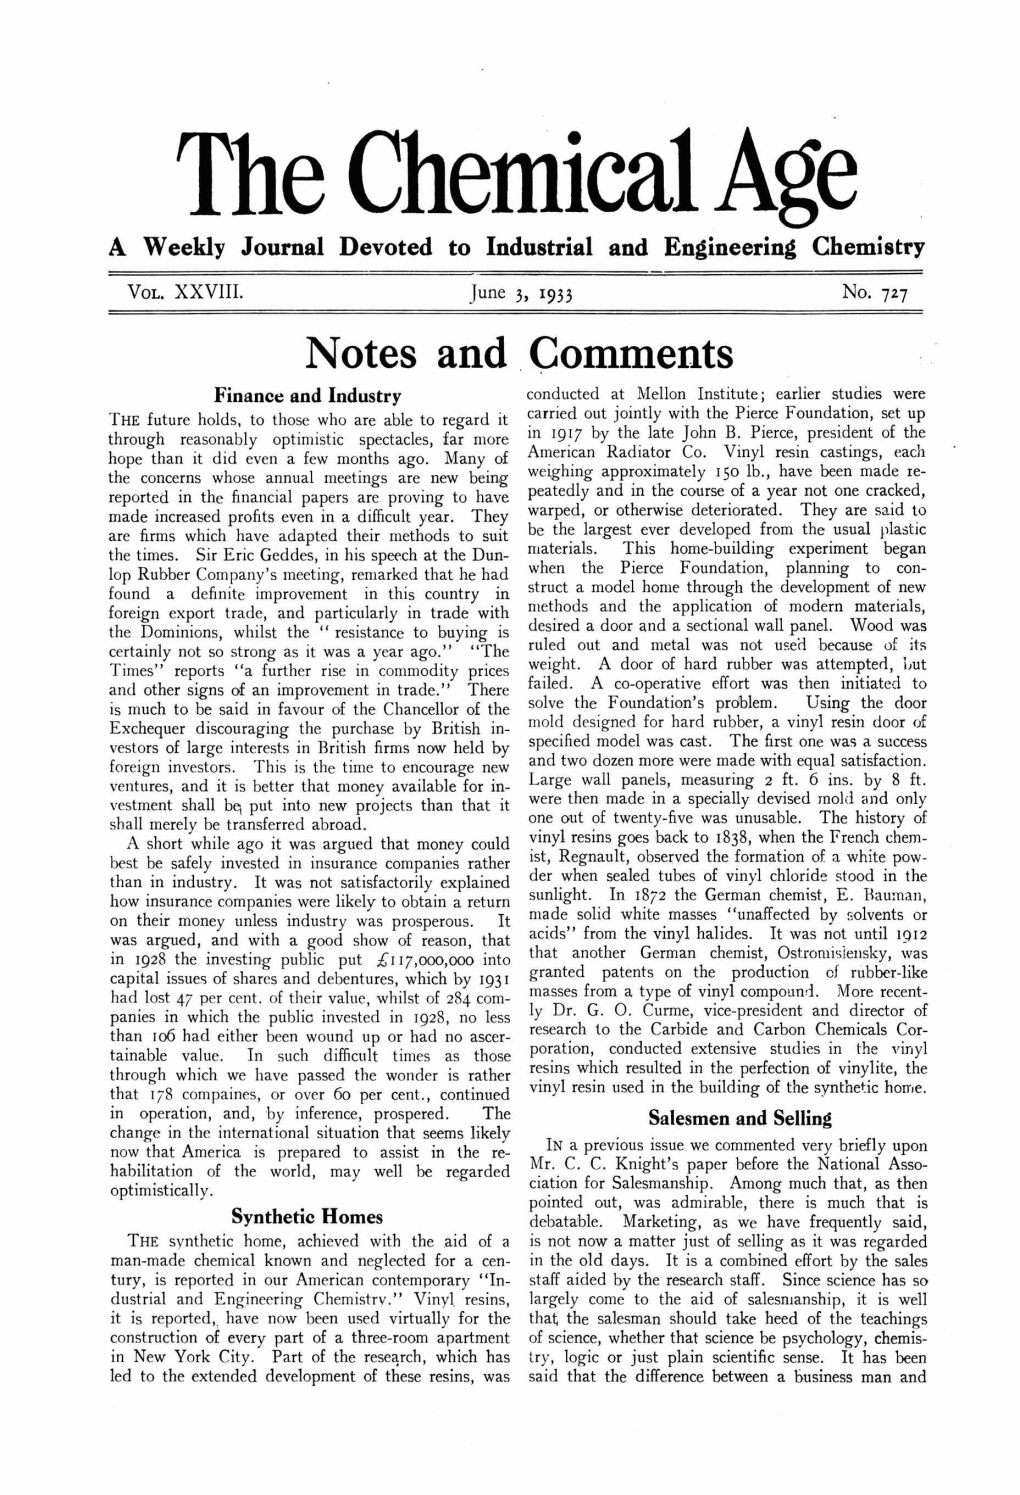 The Chemical Age 1933 Vol.28 No.727